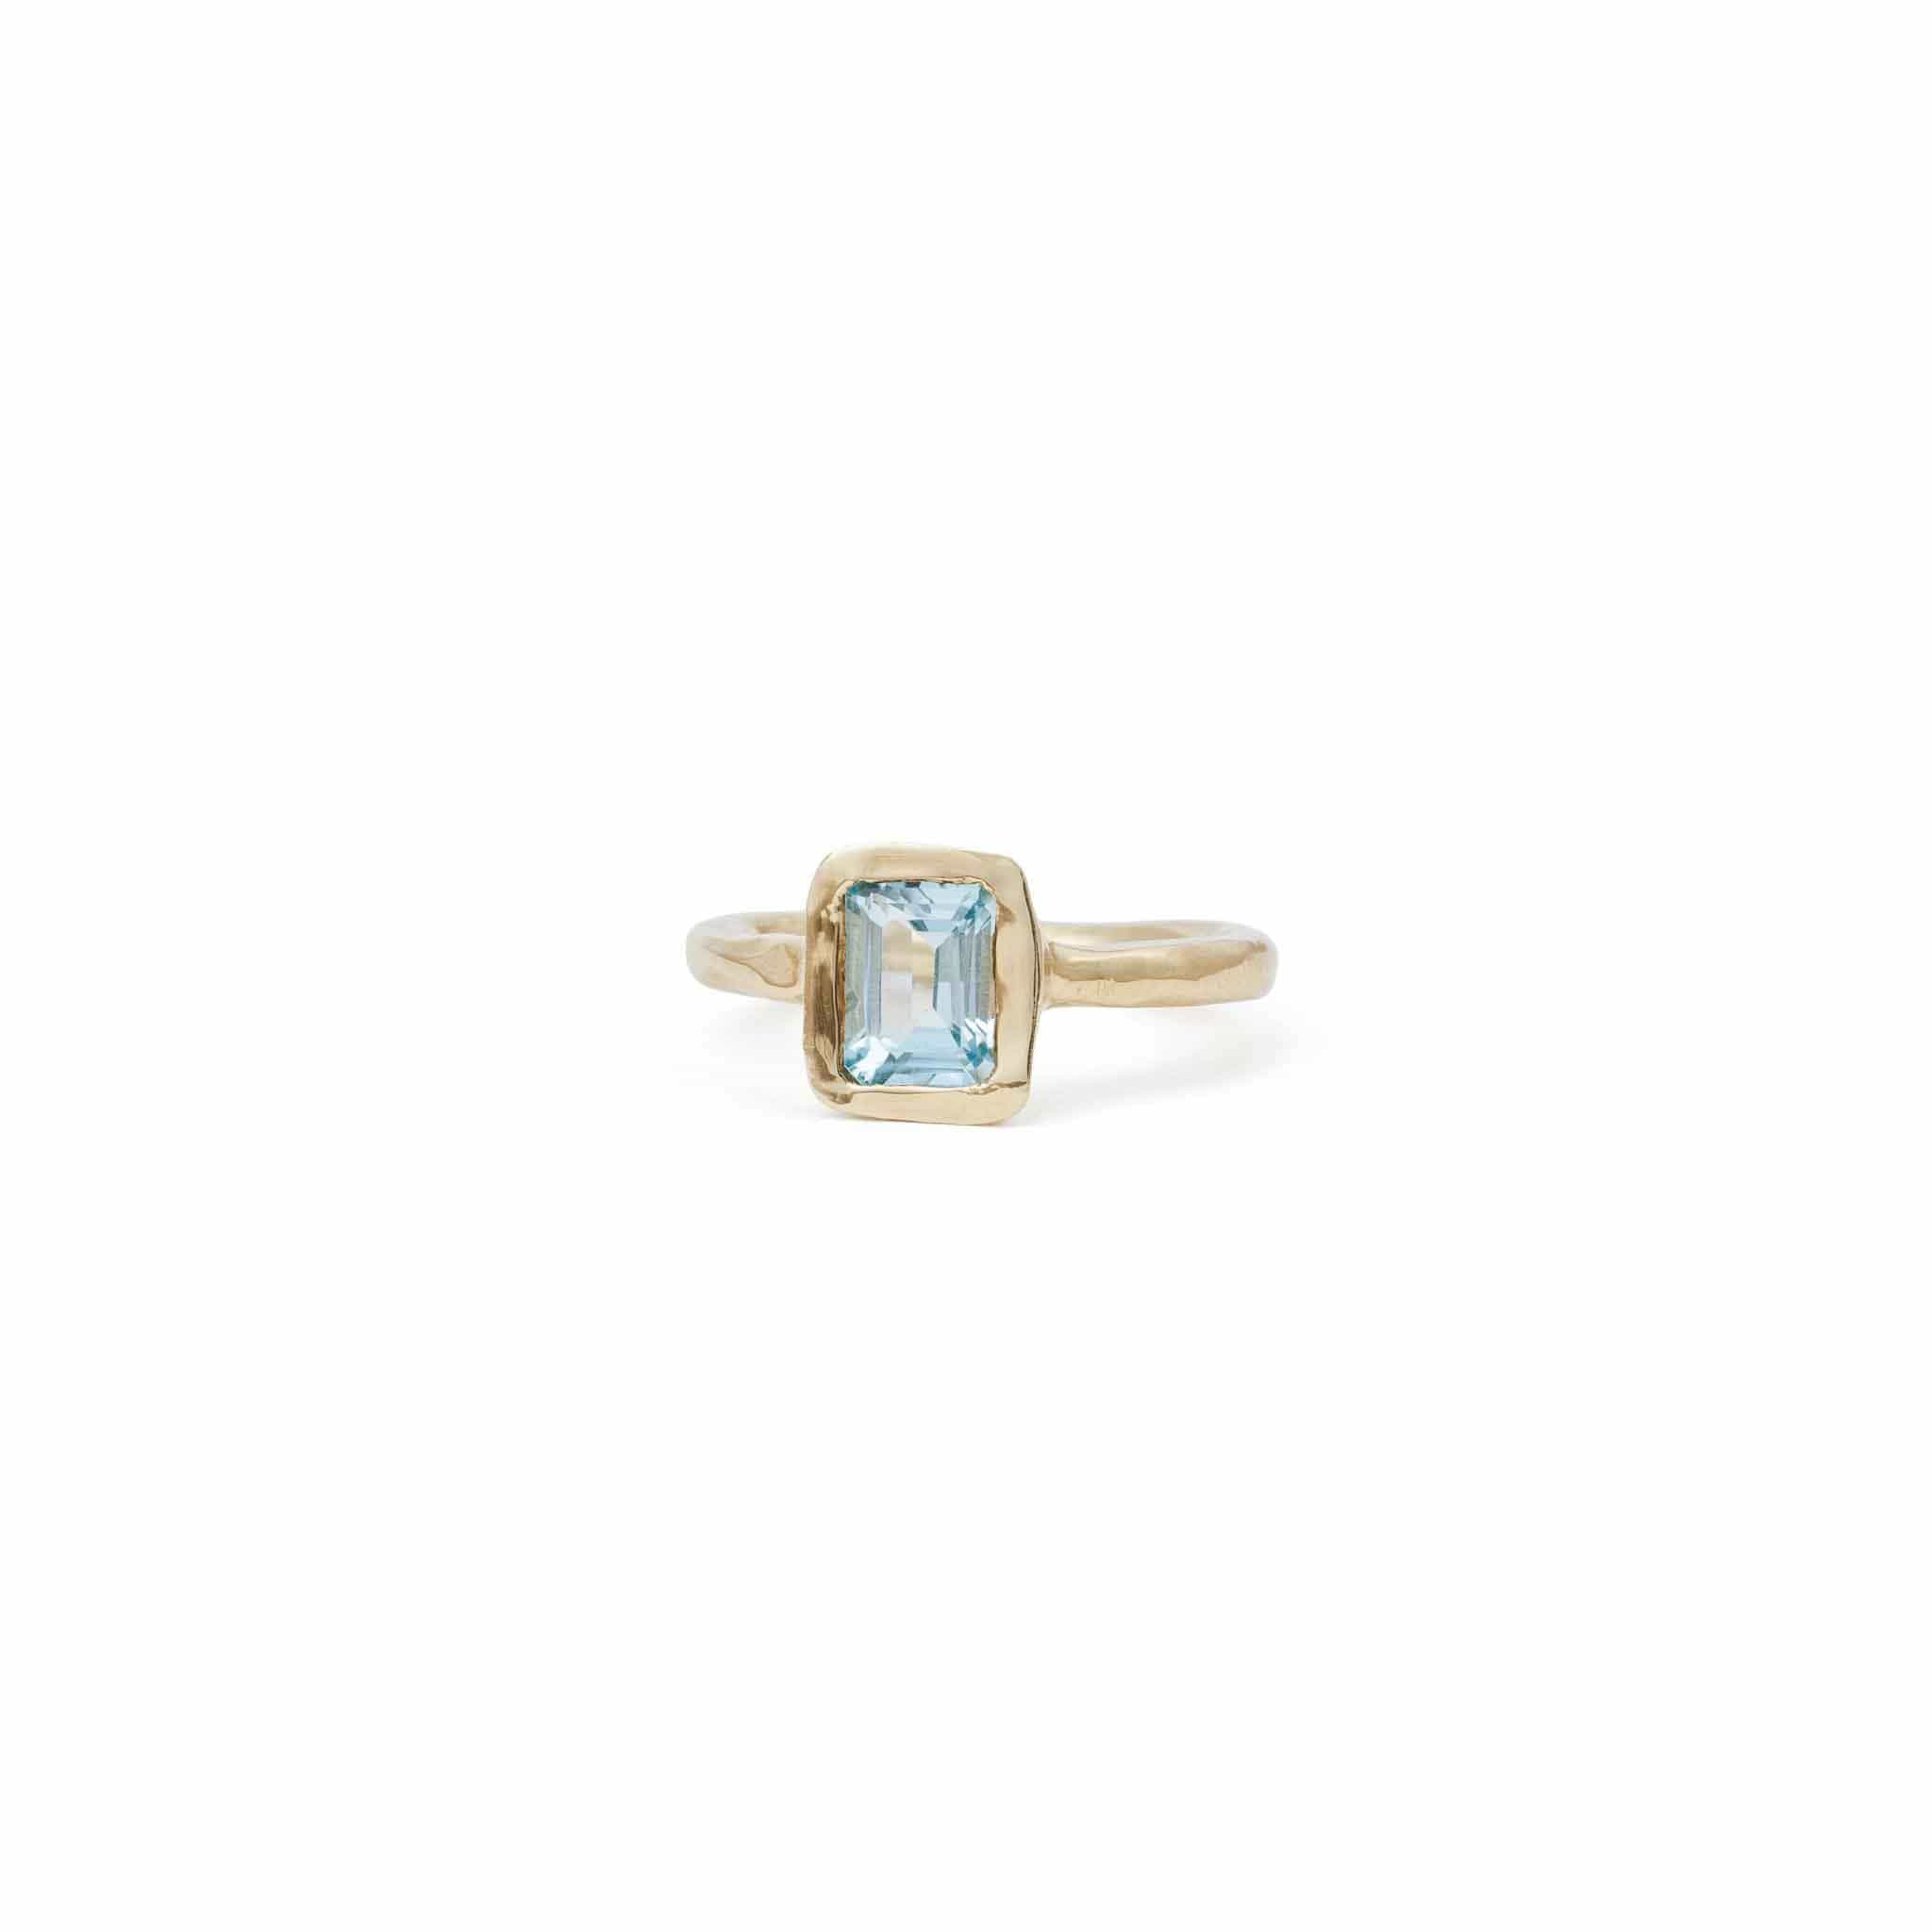 Lauren Ring - 9k gold and emerald cut topaz READY TO SHIP